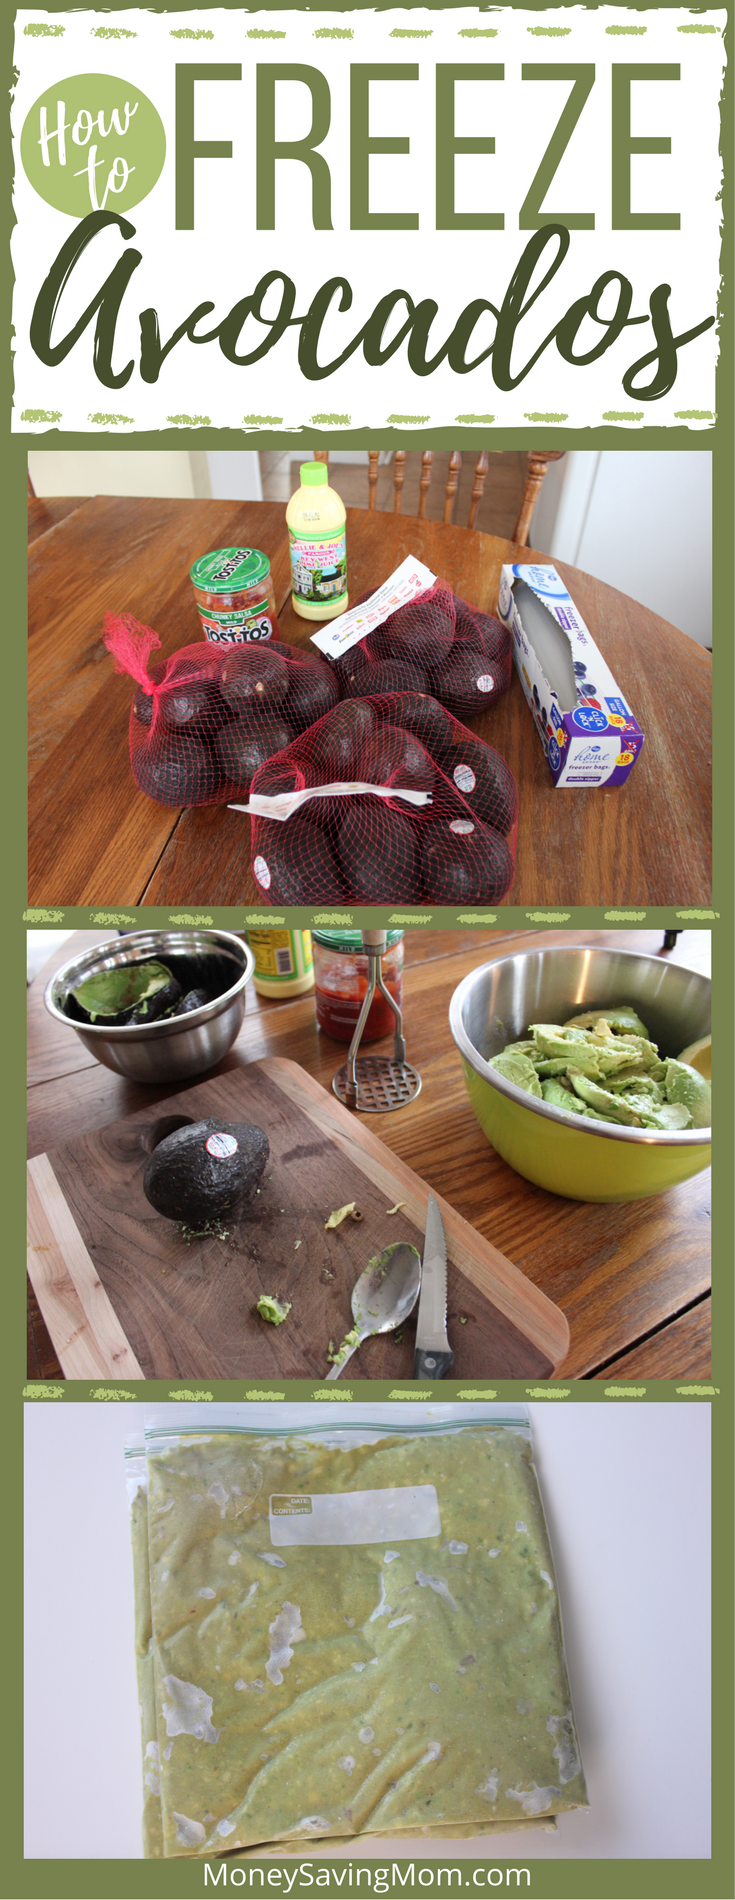 Yes -- you can freeze avocados! Read this post to find out how! It's actually SUPER simple!